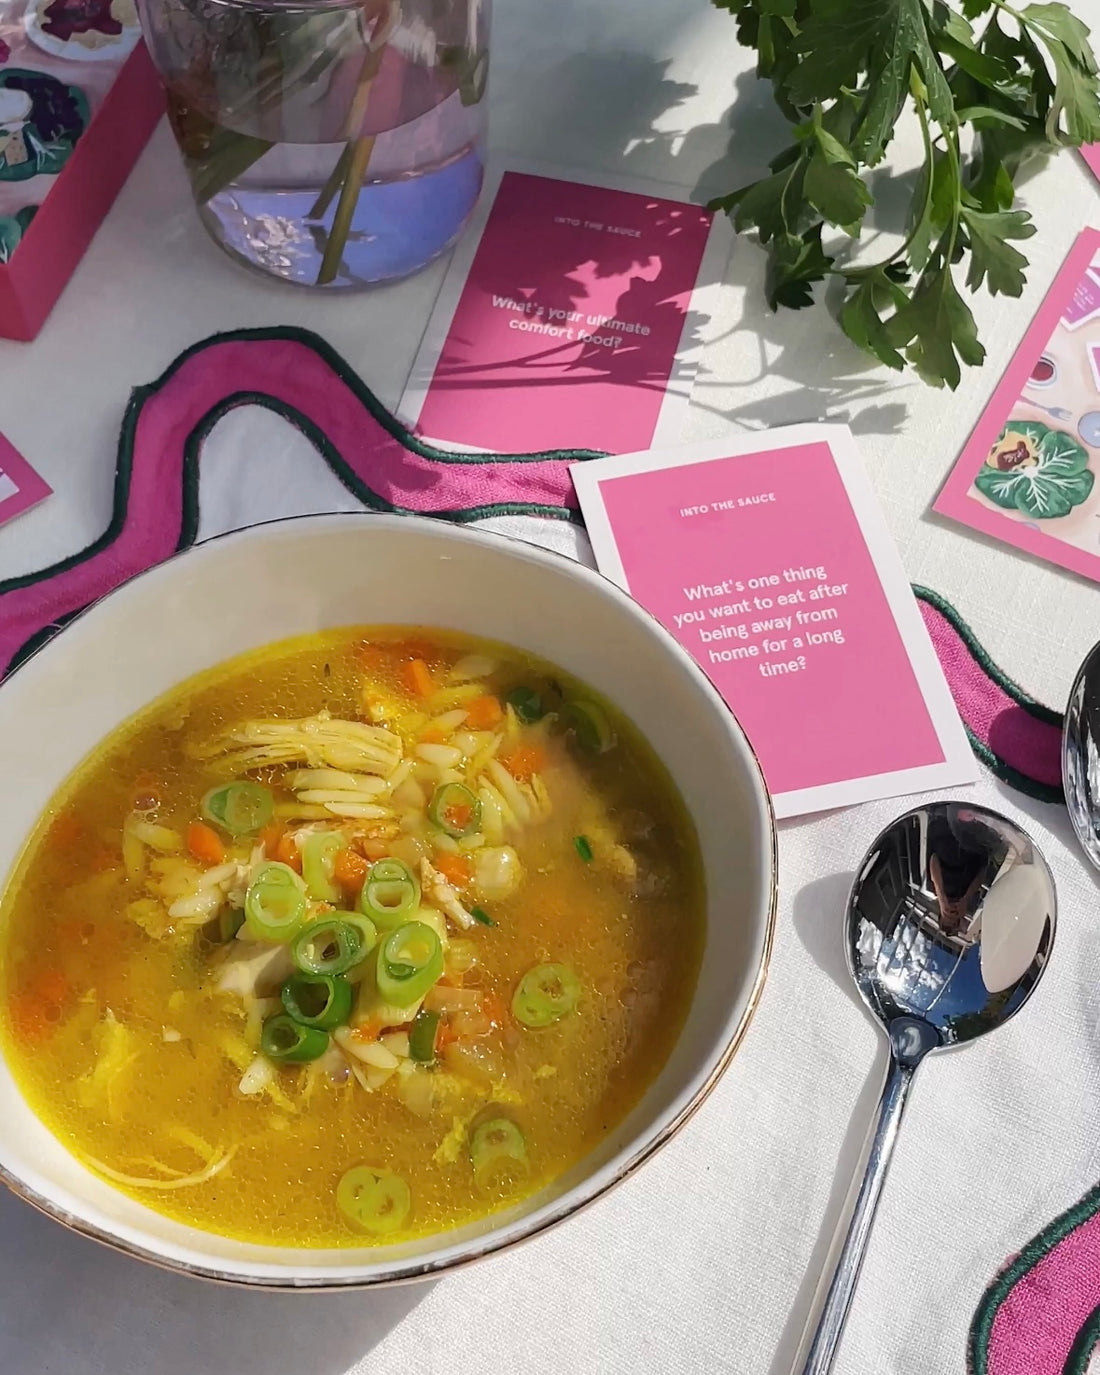 On the left is a bowl of chicken soup, and on the left is the same bowl and the corner of a pink card. @intothesauce, Into the Sauce, Tori Falzon, #intothesauce